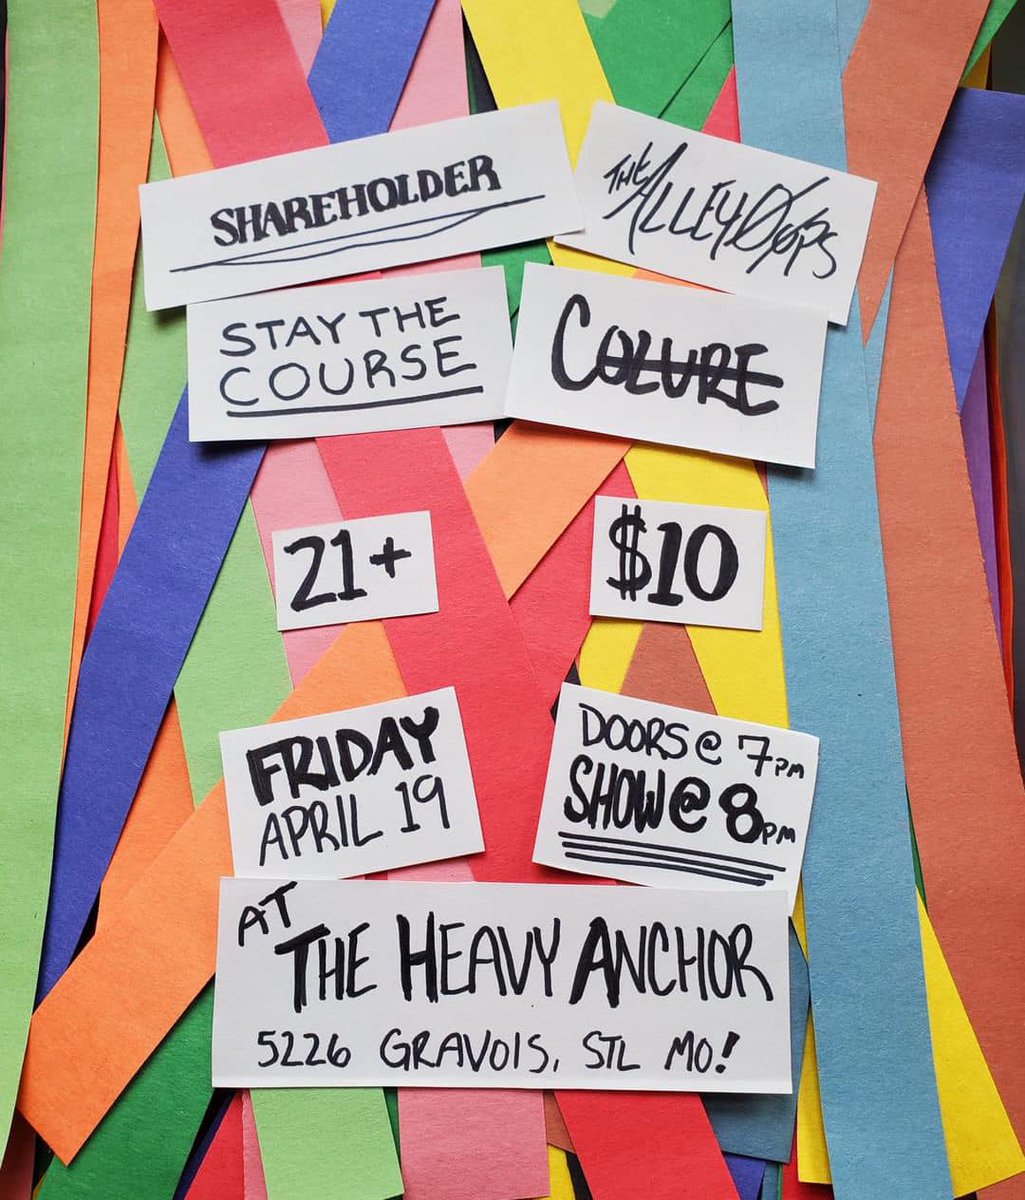 Show Friday at 8pm @314Punk Presents: - Shareholder - Stay The Course (KS) - Colure - The Alley Oops $10 for the show, no cover to get in the bar side Bar opens at 5pm / Doors at 7pm / Show at 8pm